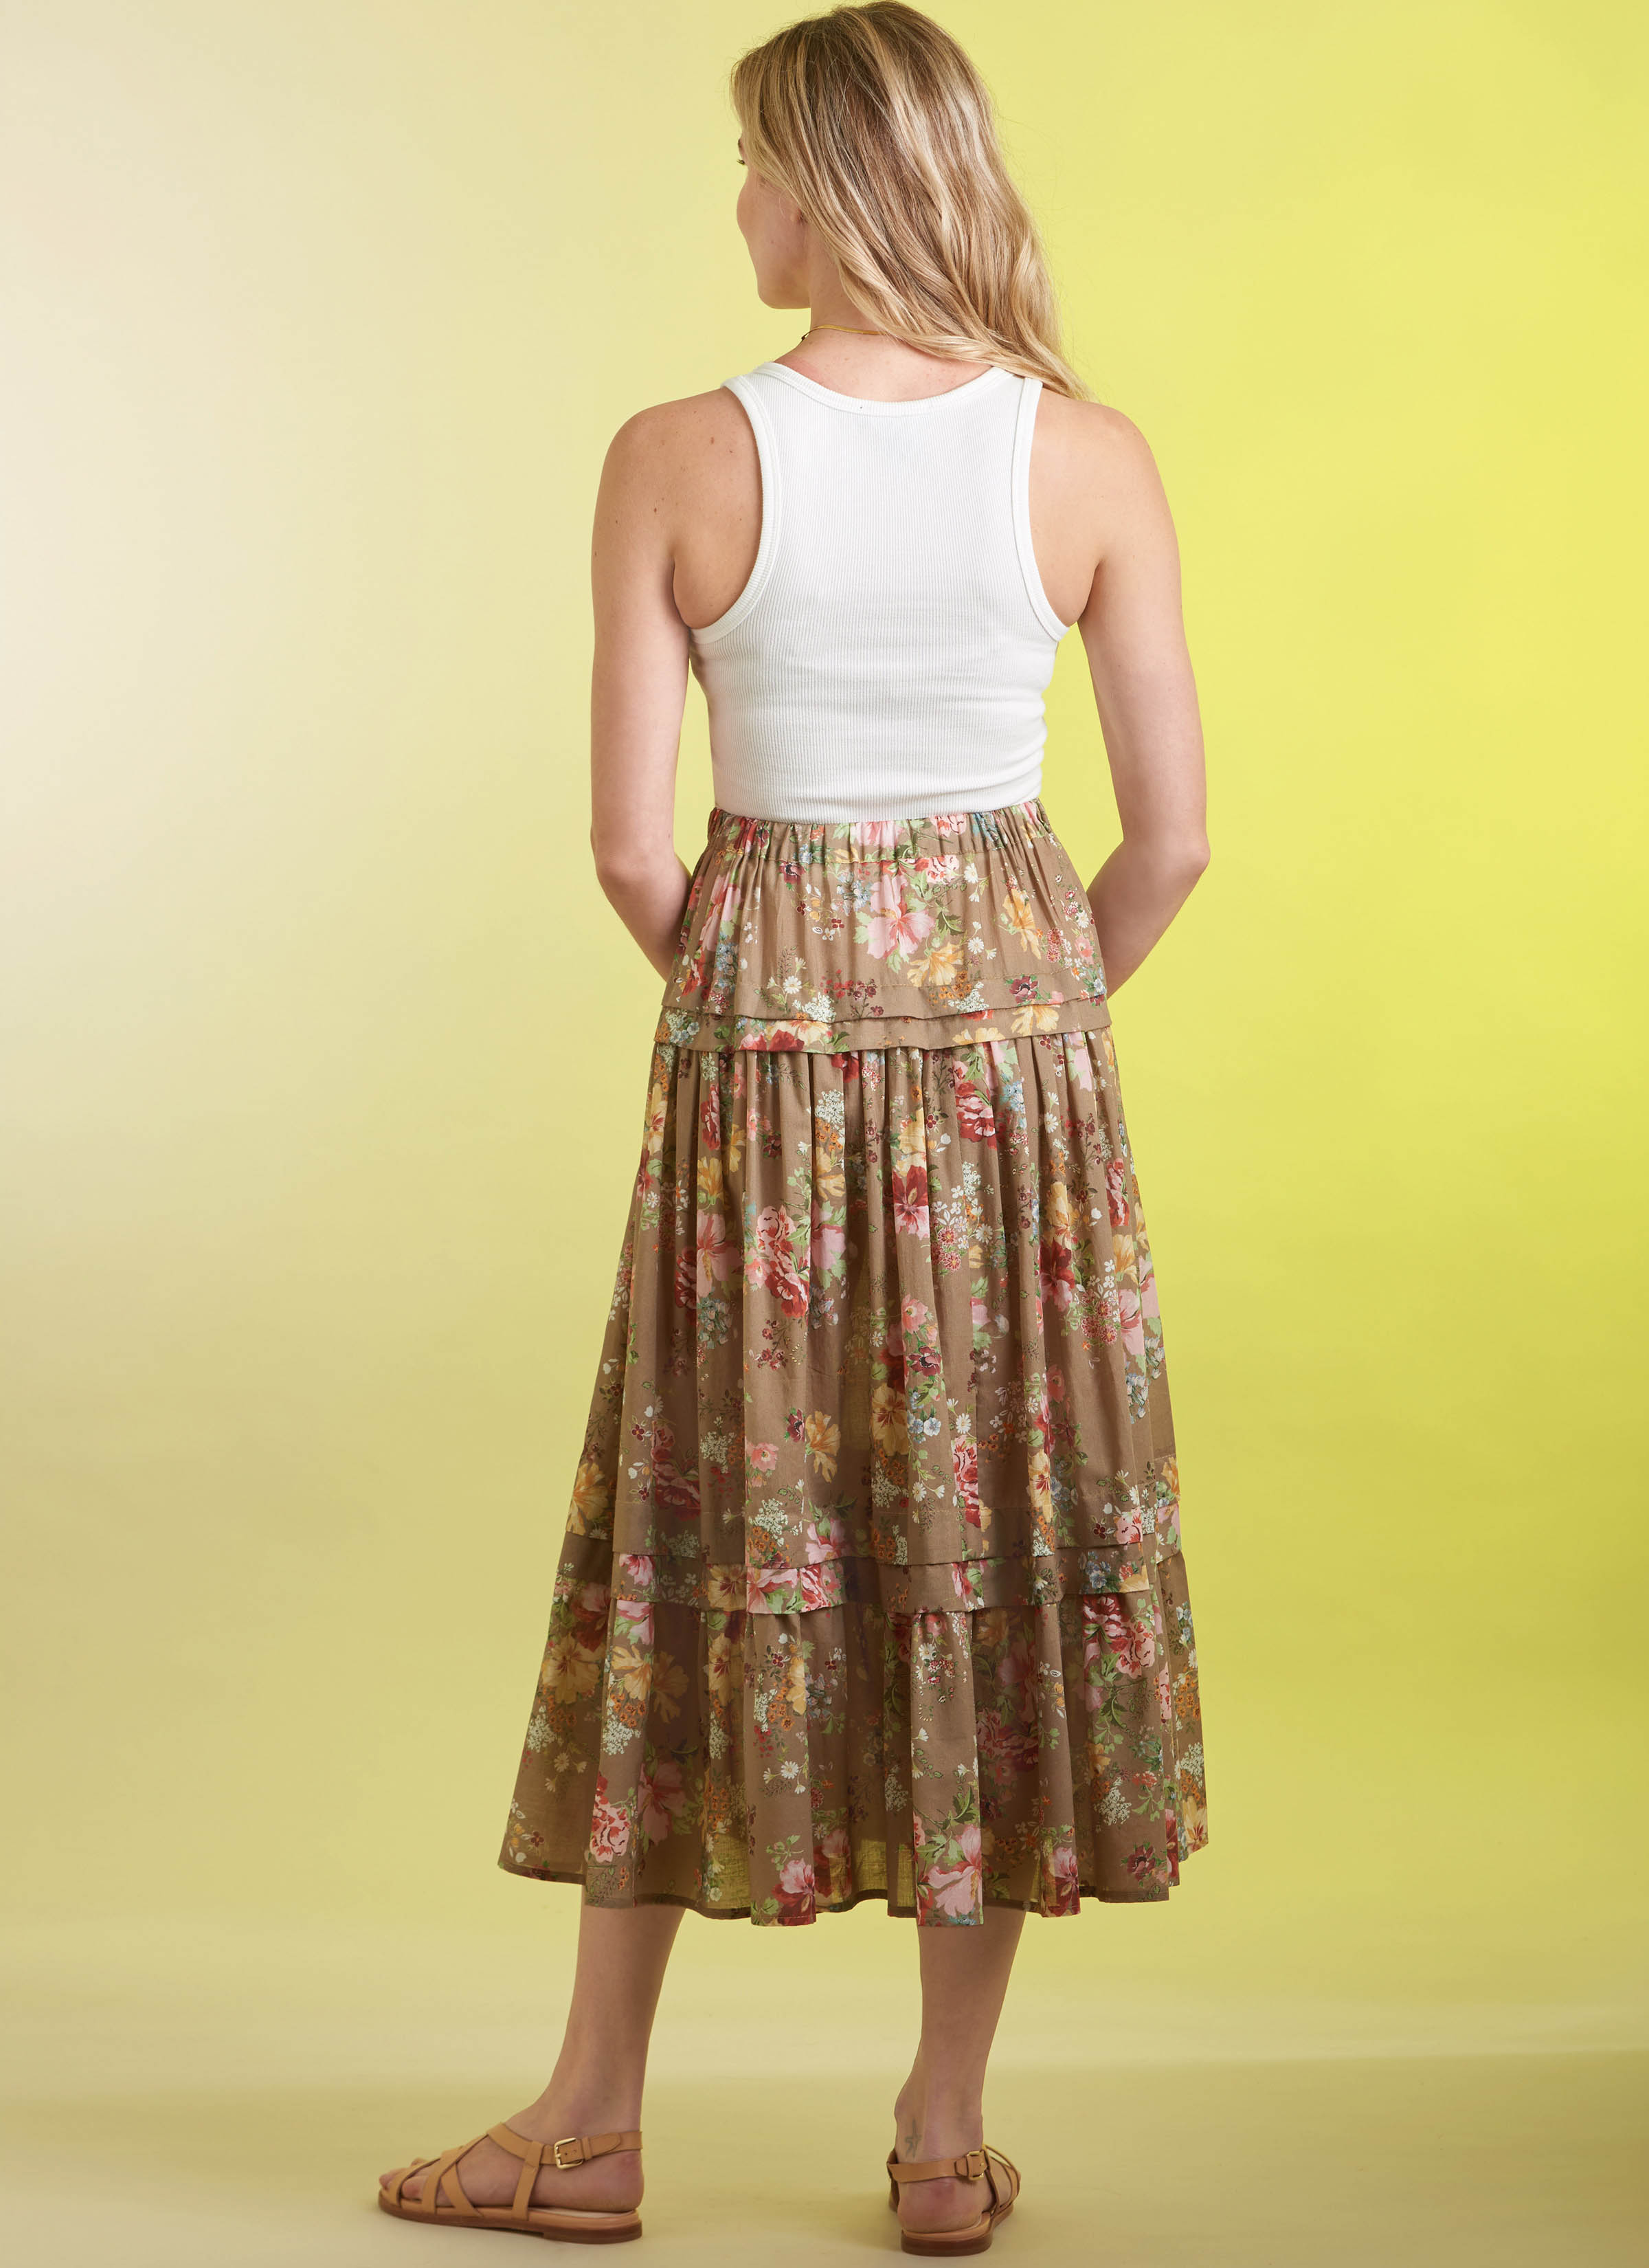 Simplicity 9750 sewing pattern Misses' Skirt in Three Lengths from Jaycotts Sewing Supplies